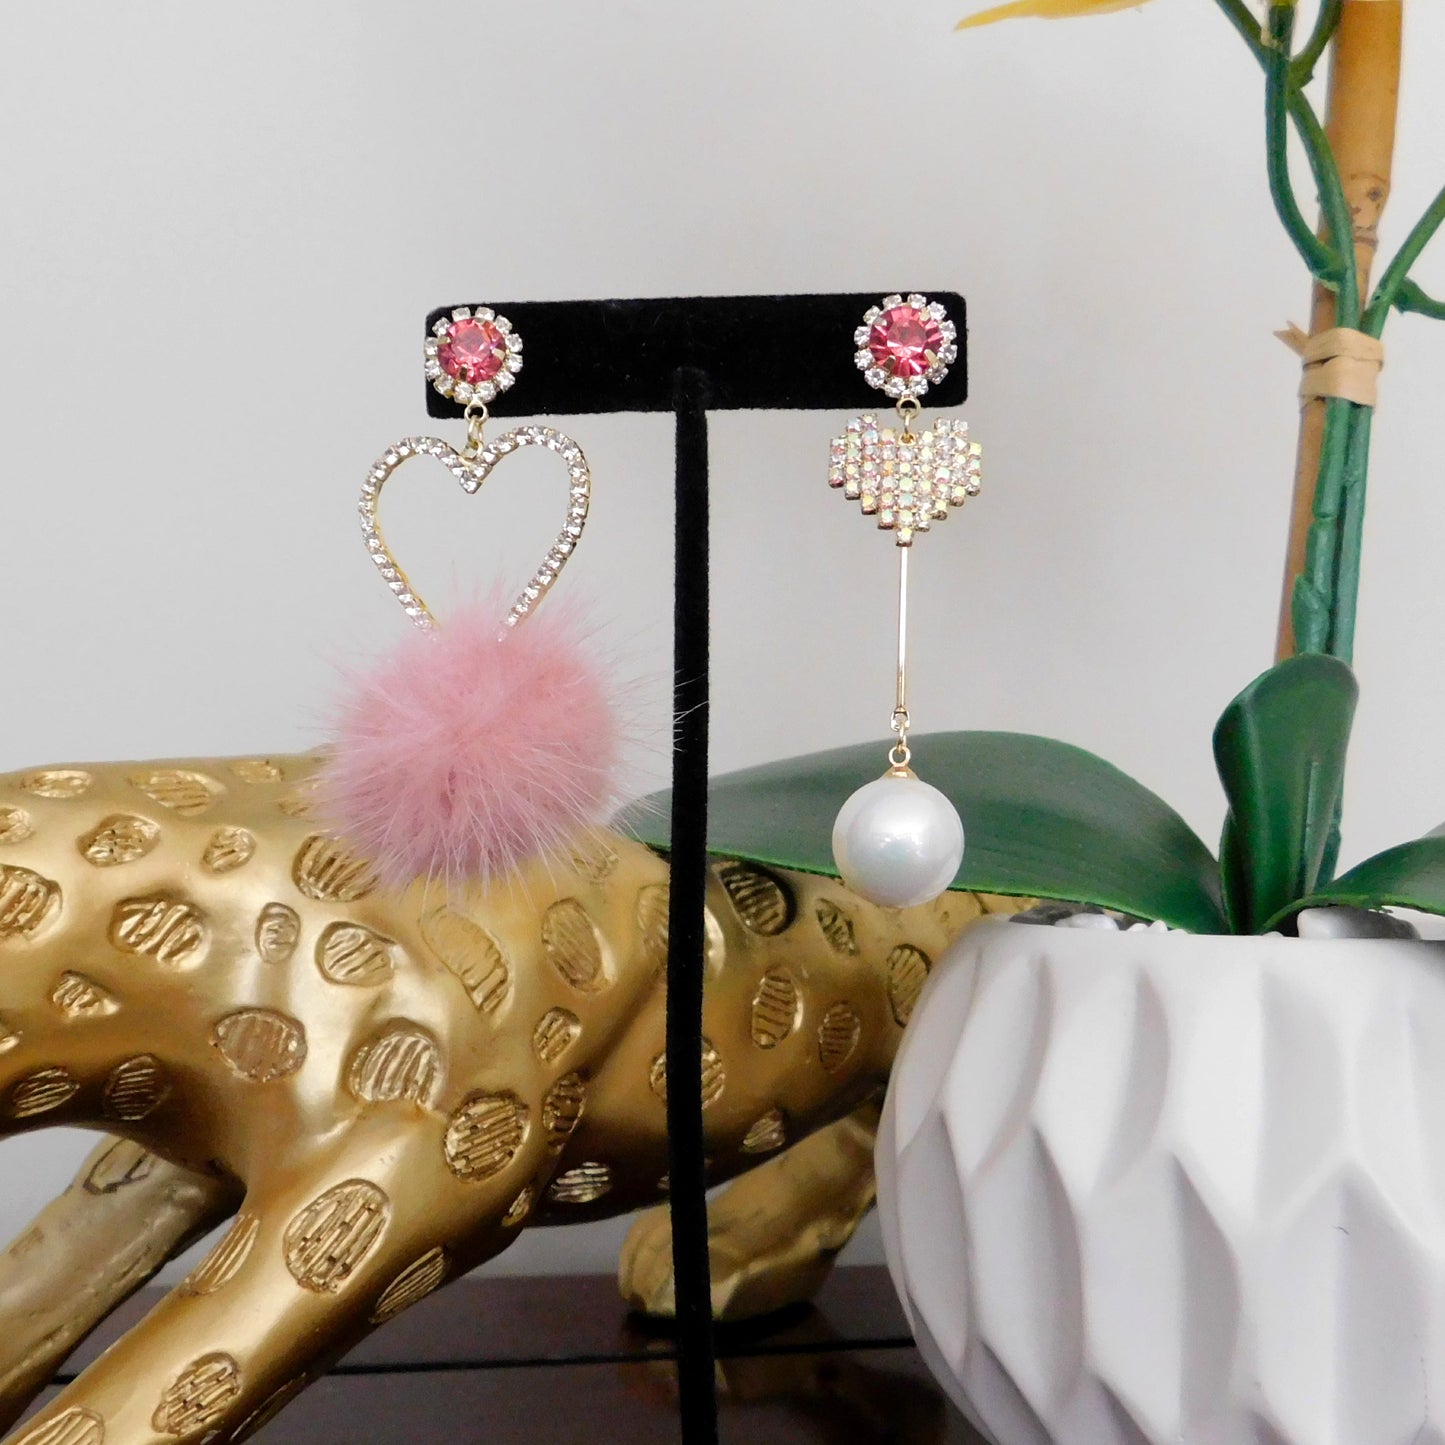 Iridescent Pink and Gold Heart Dangle Earrings with Pom Pom and Beads